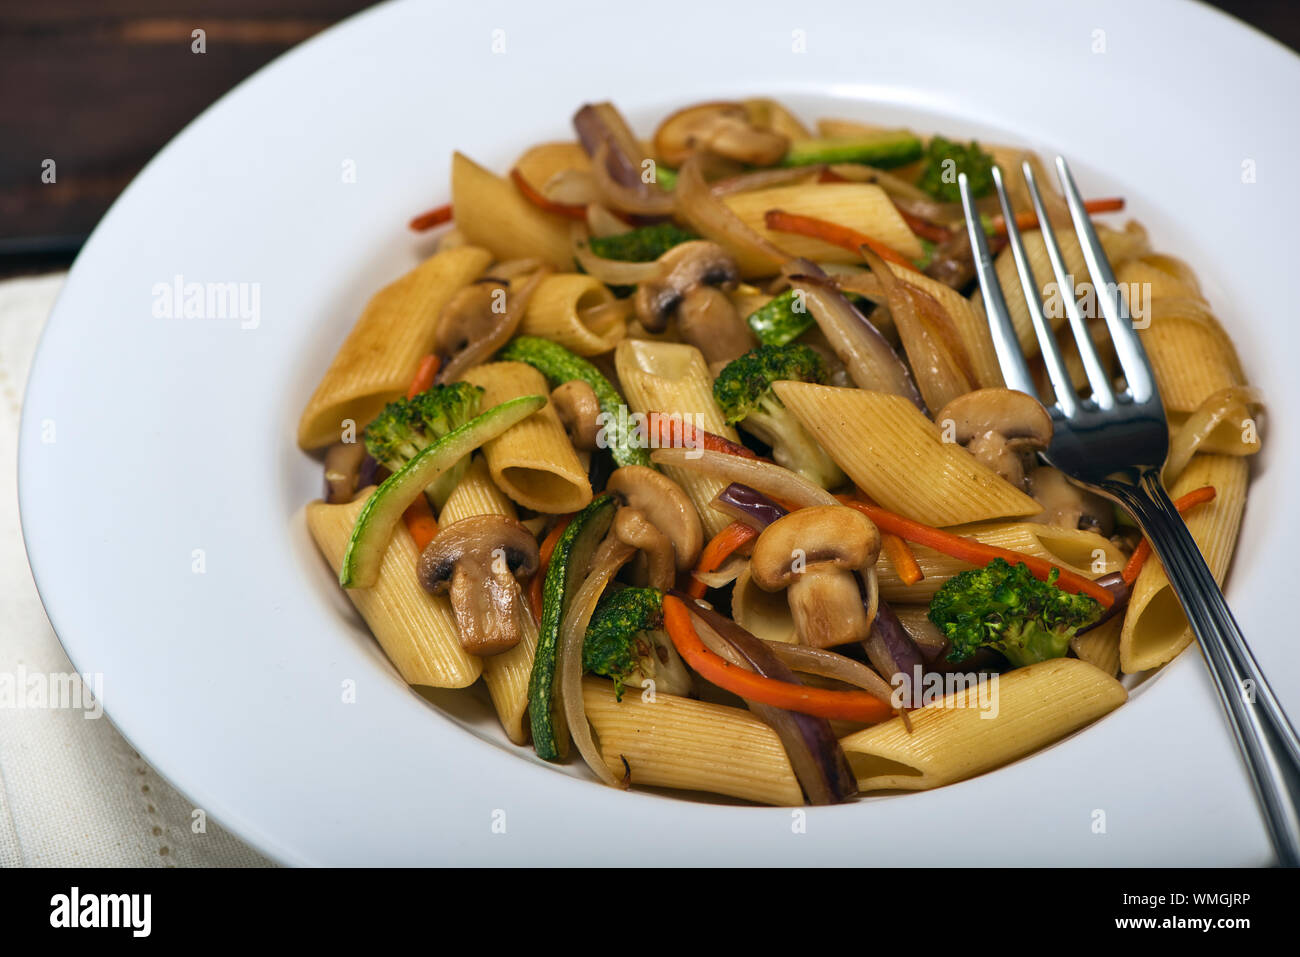 Hot dish of Penne Rigate noodles with Sauted Vegetables in Juliana: Zucchini, Onions, Eggplant, Carrots, Mushrooms and Broccoli in a white pasta plate Stock Photo